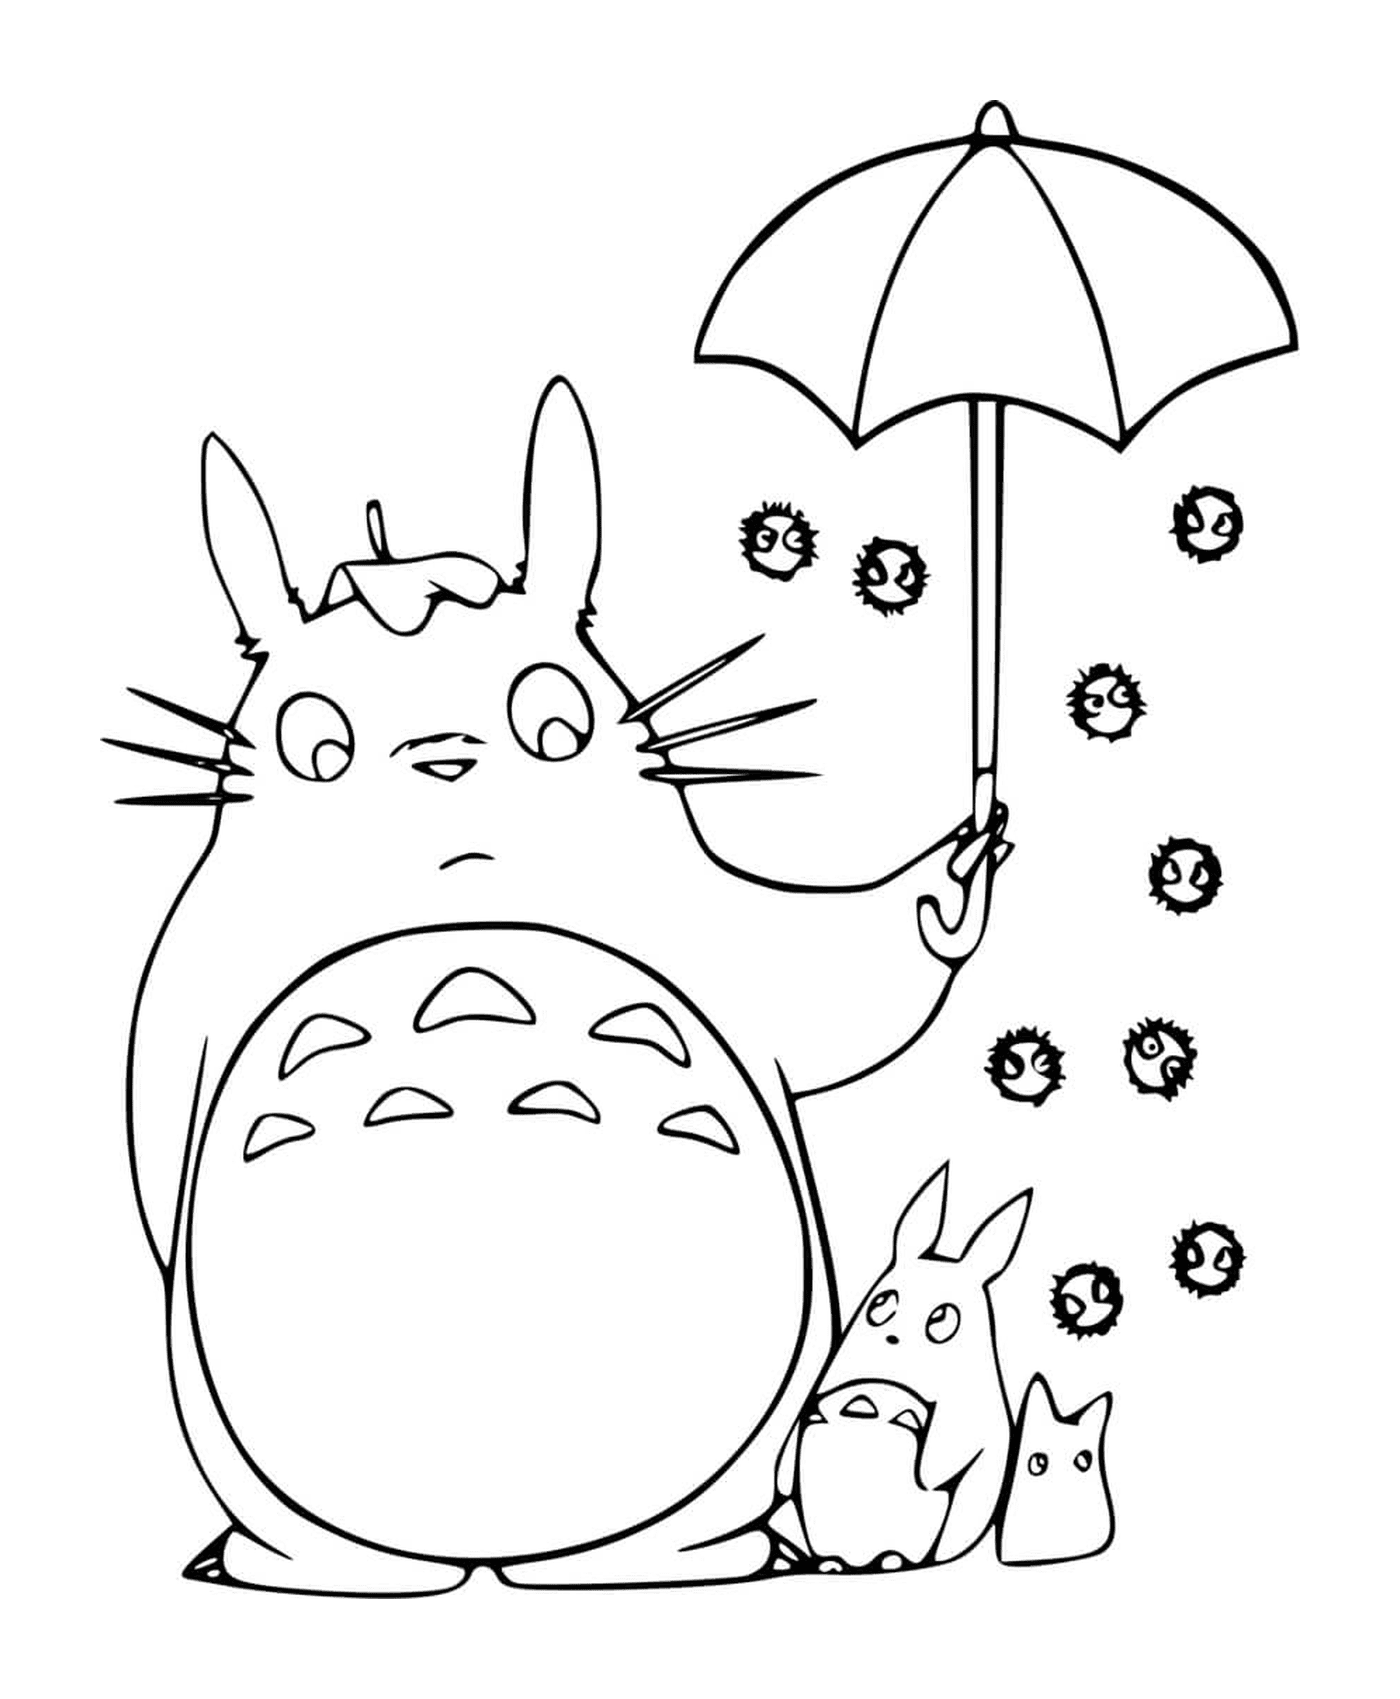  Totoro holding an open umbrella with a child 